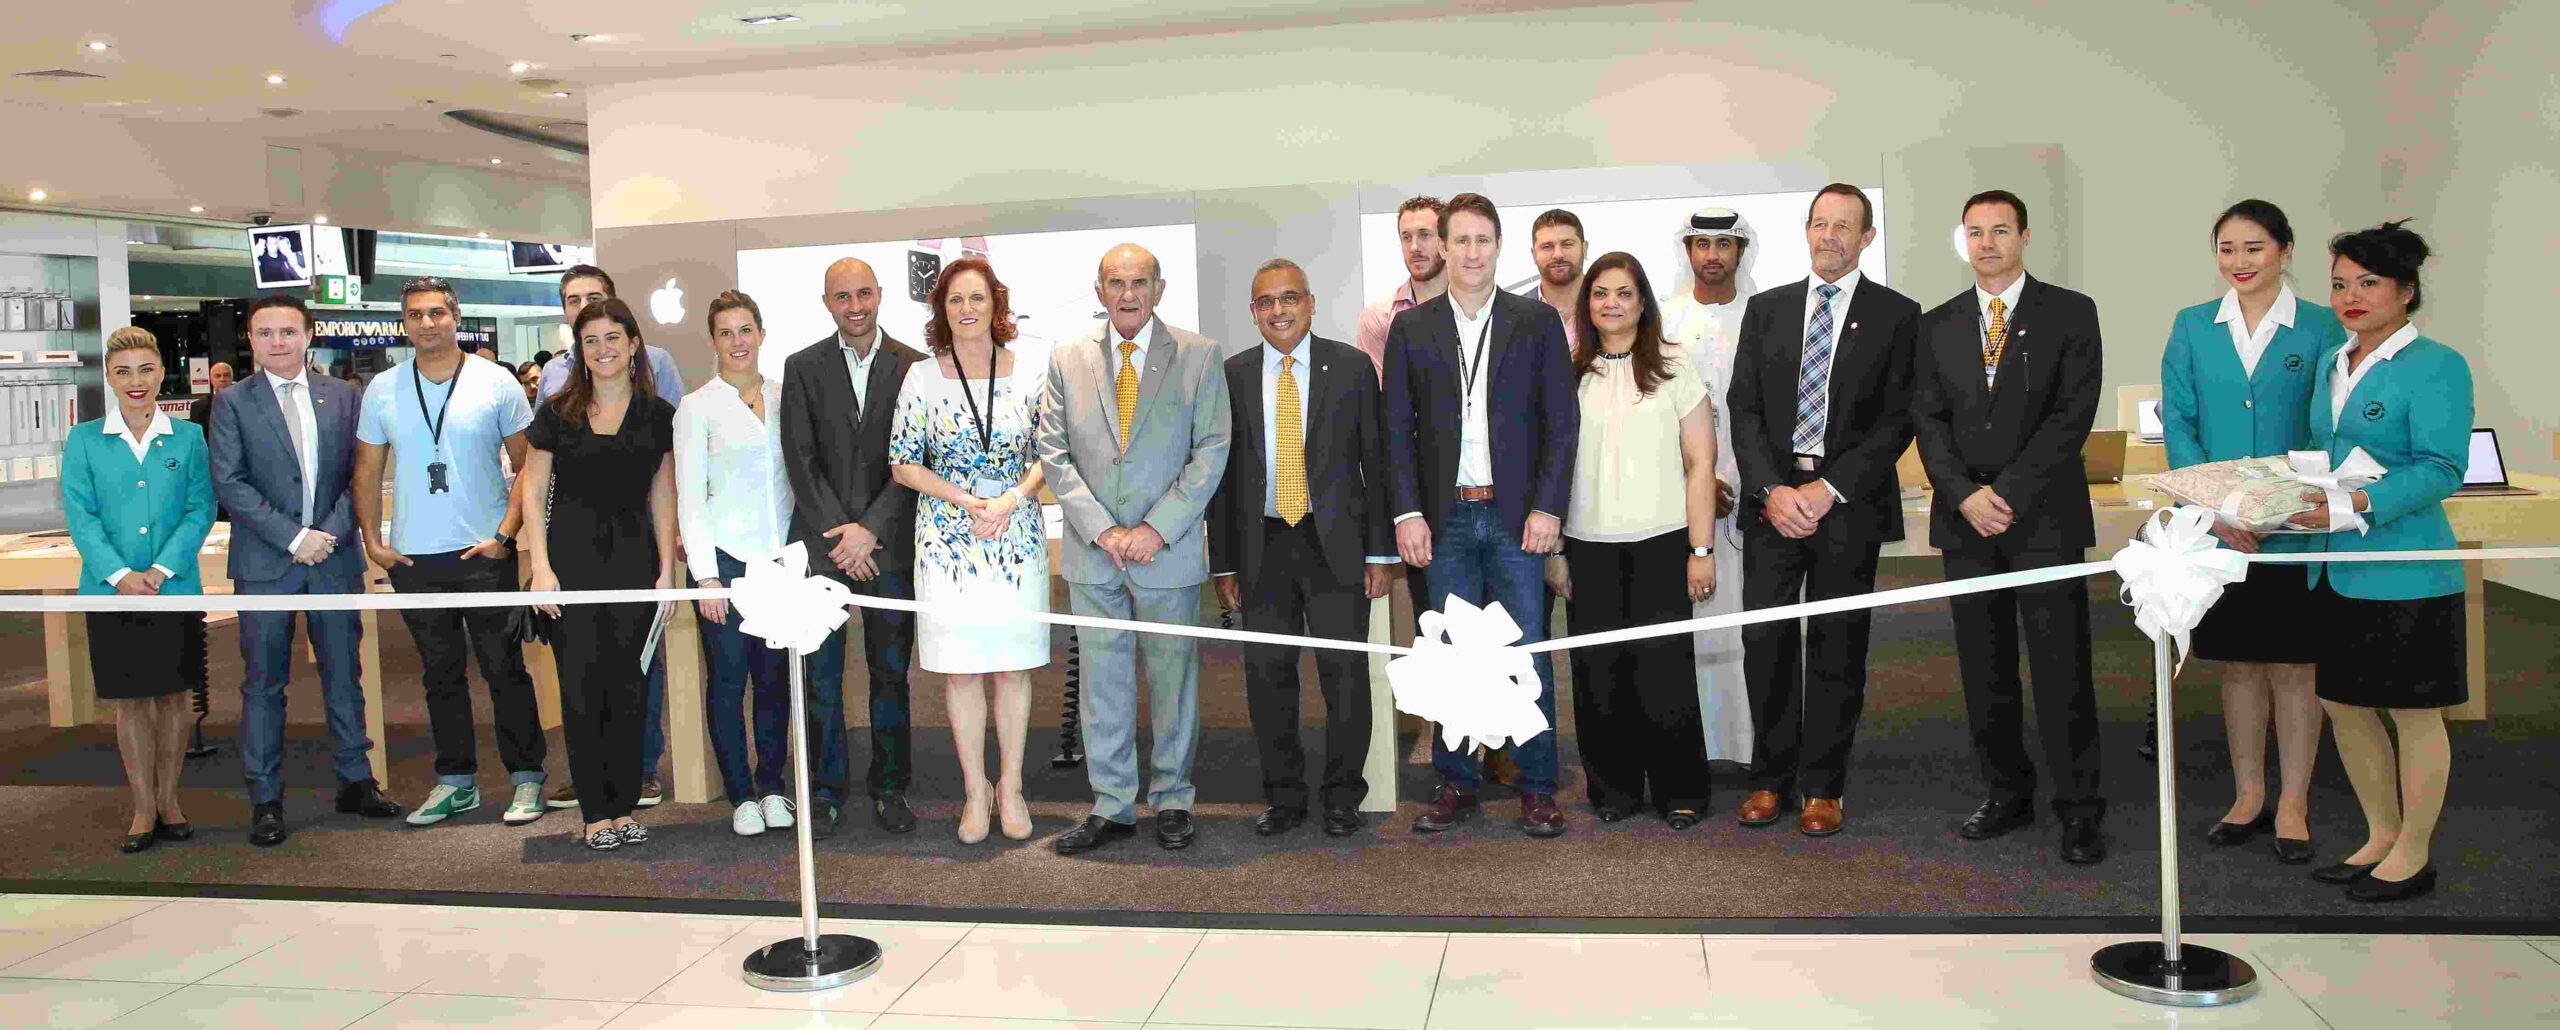 A new take on technology: Dubai Duty Free and Apple officials open the Apple programme at Dubai T3